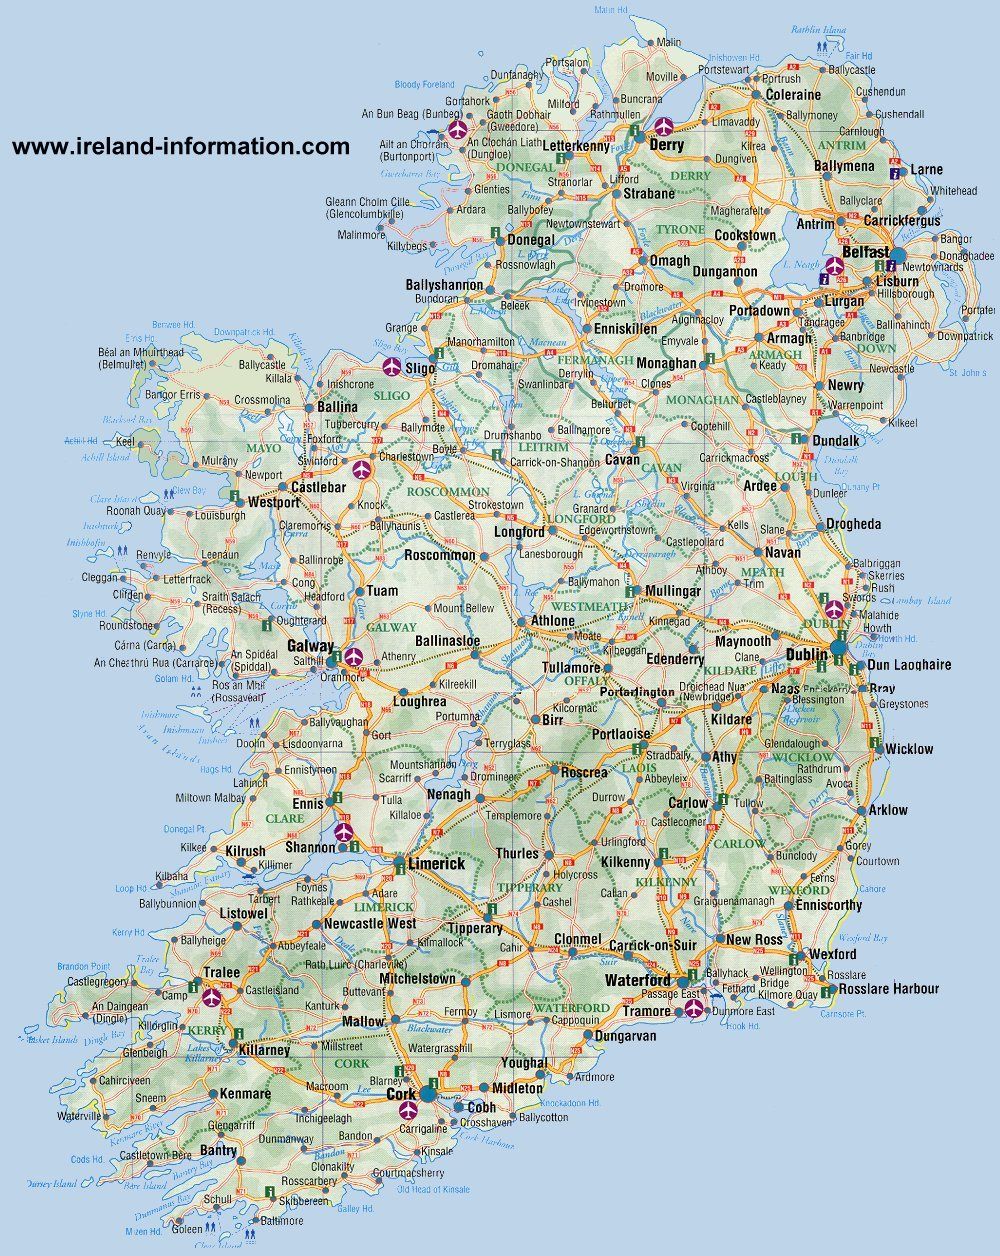 Ireland Maps Free, and Dublin, Cork, Galway